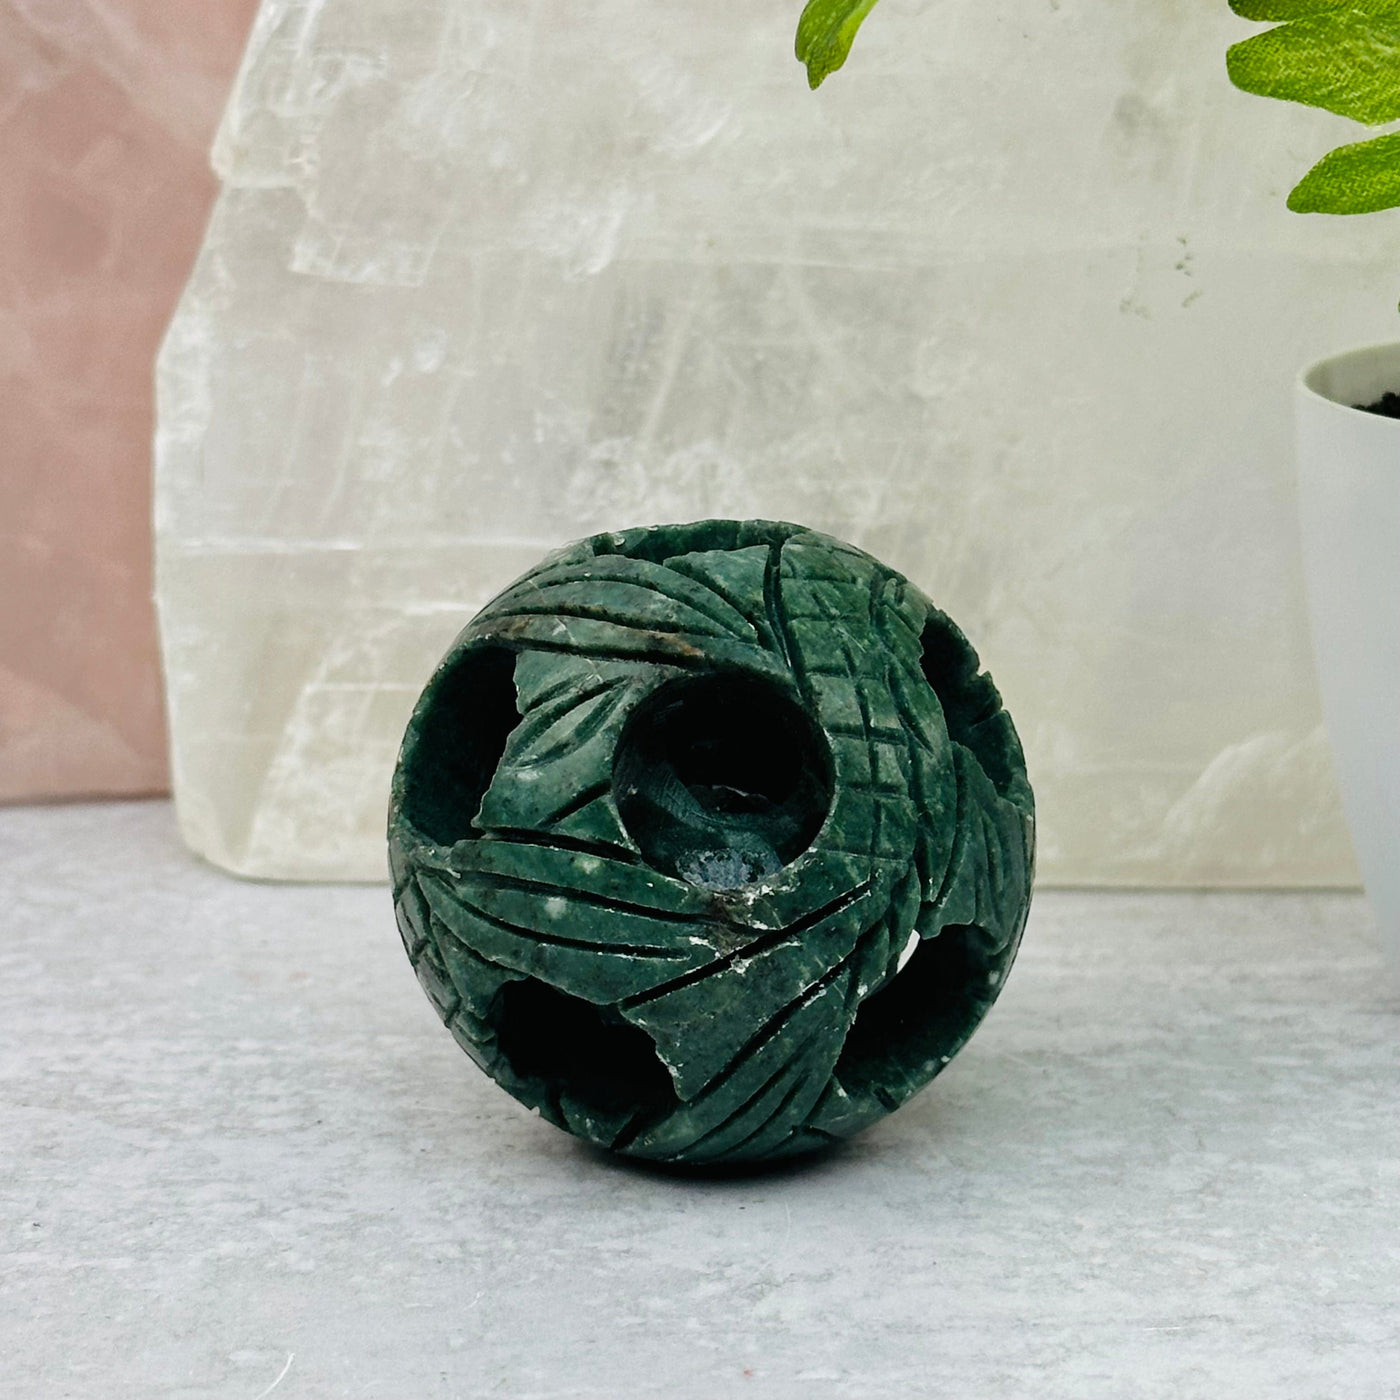 small Carved Jade Puzzle Ball displayed as home decor 